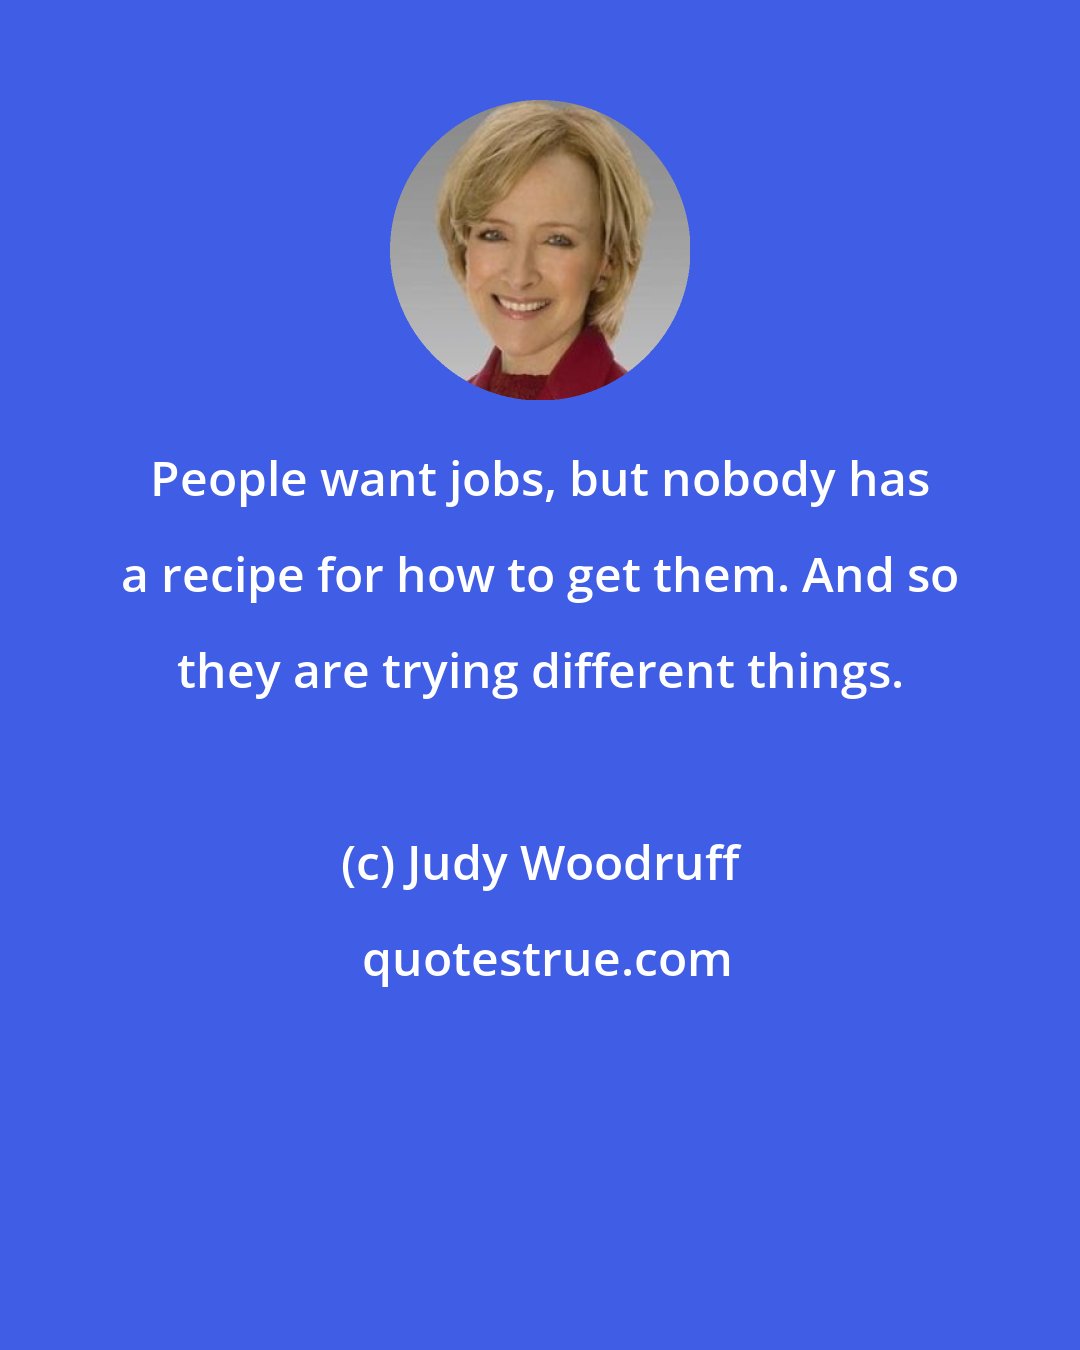 Judy Woodruff: People want jobs, but nobody has a recipe for how to get them. And so they are trying different things.